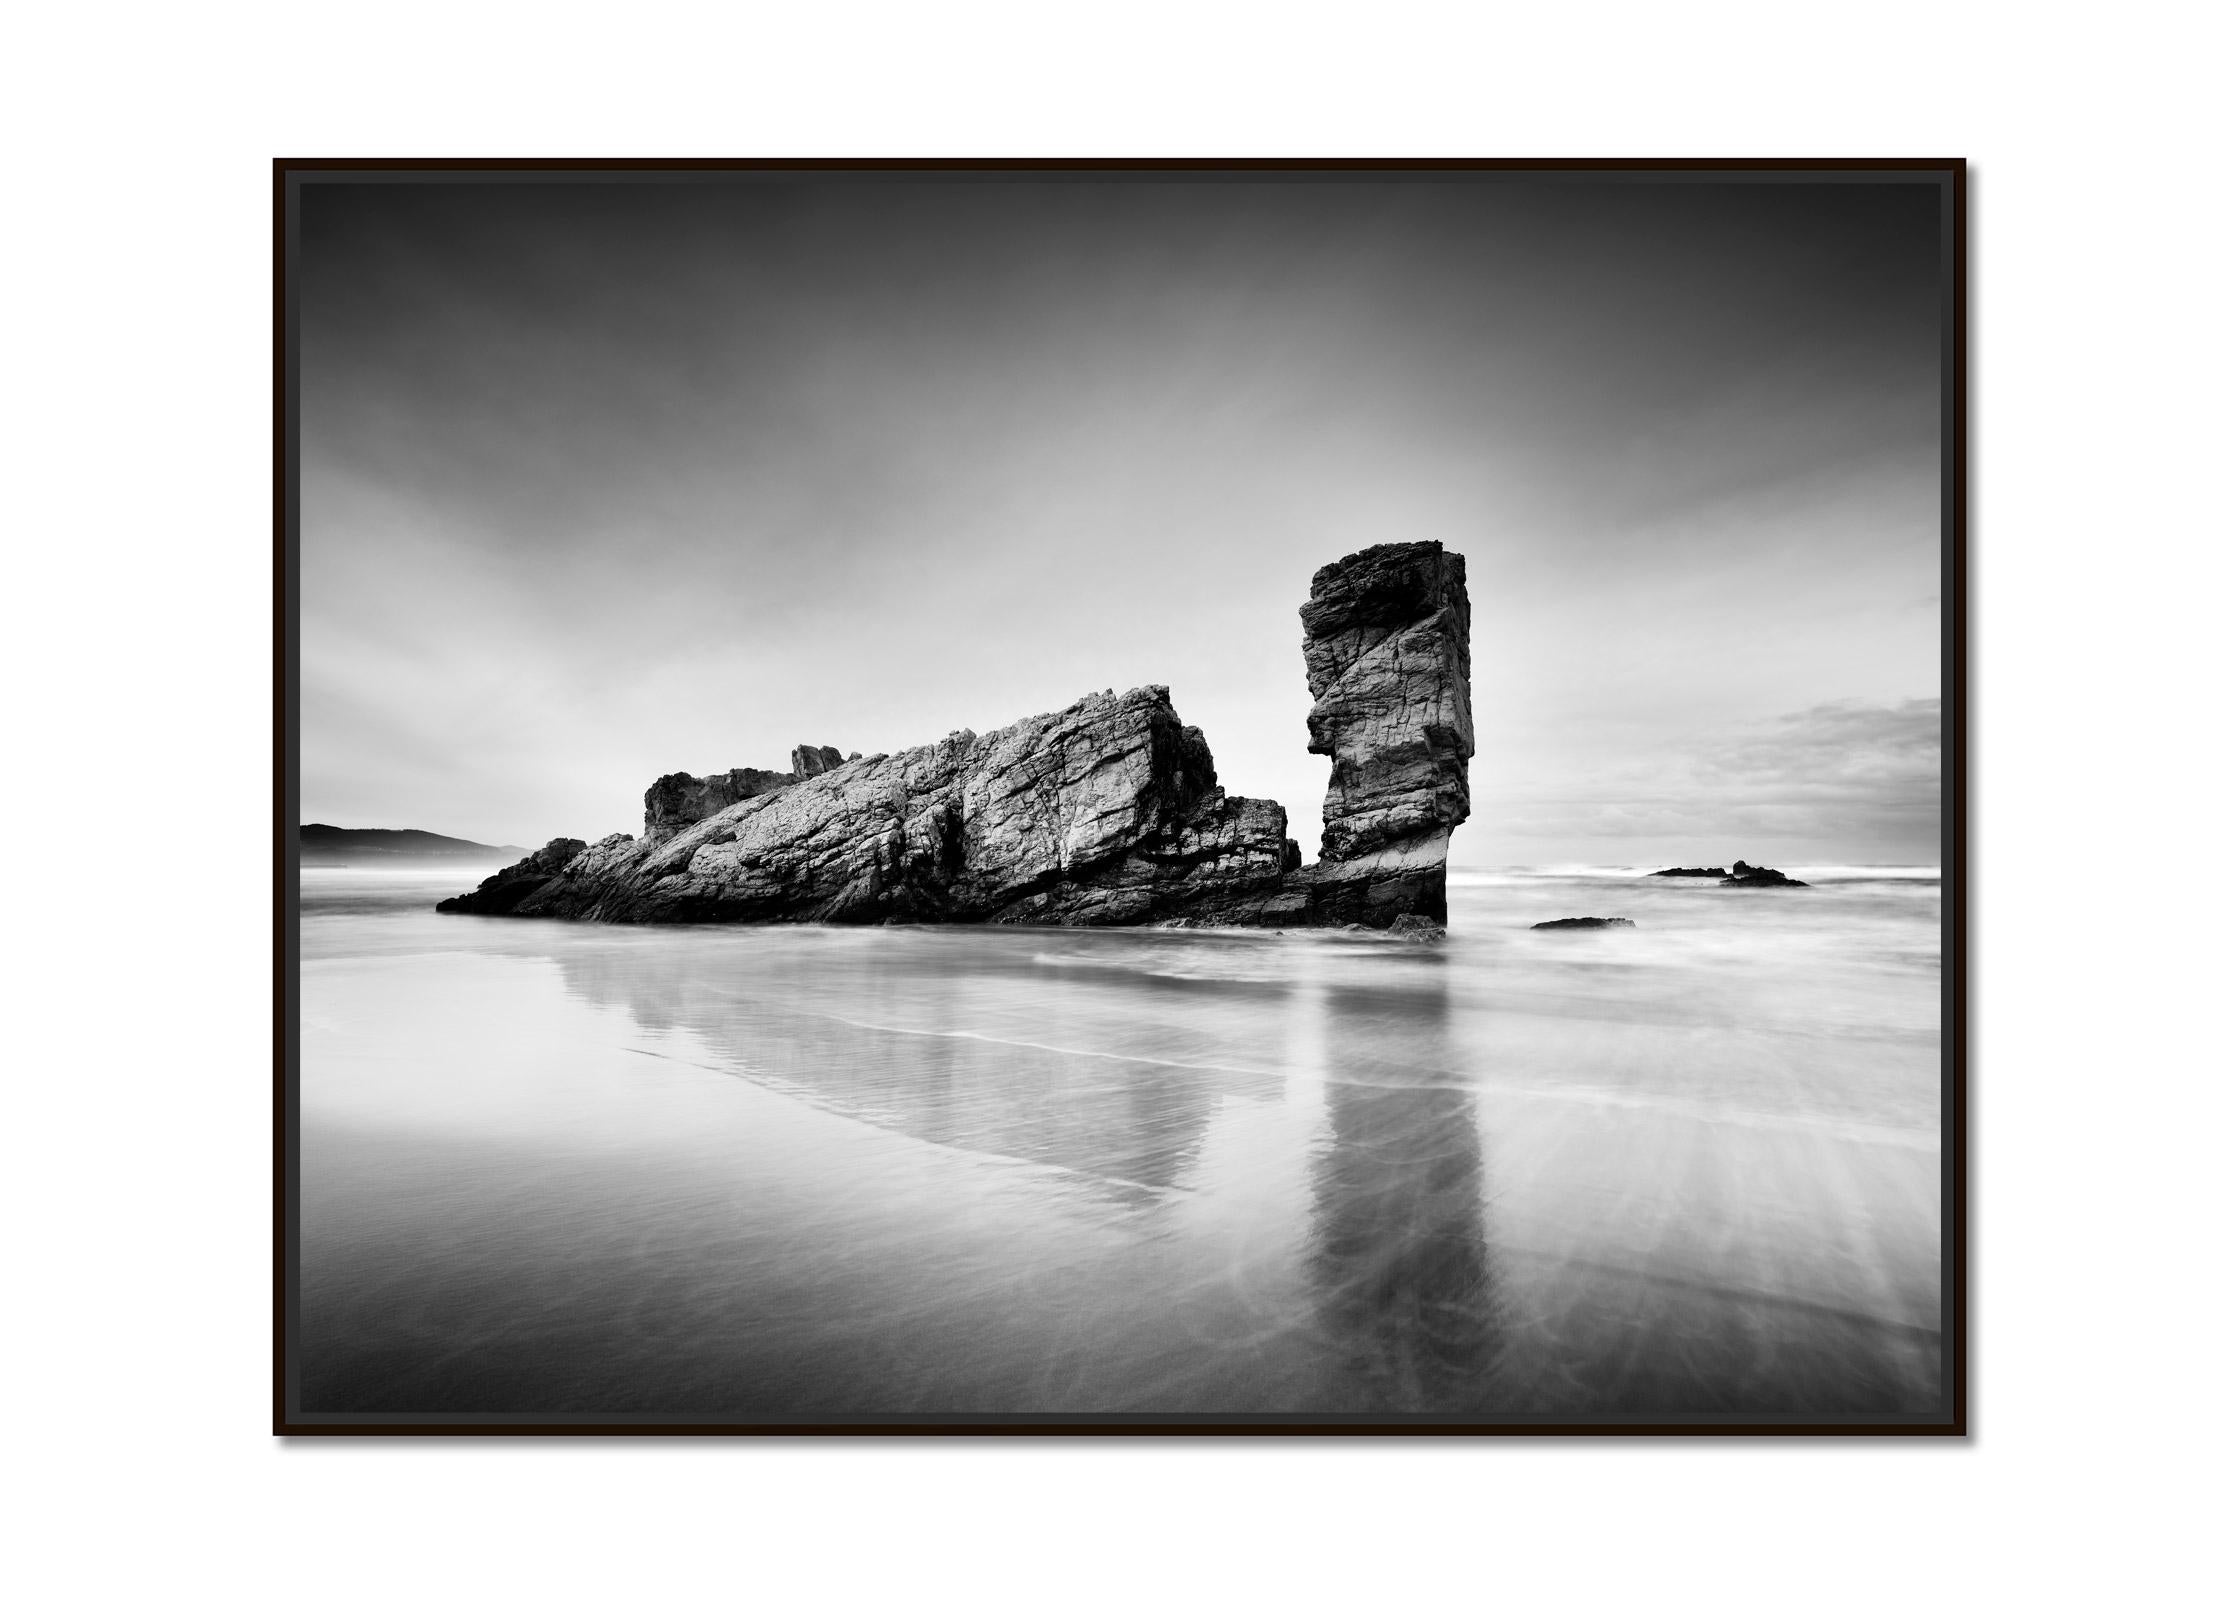 Bay of Biscay, beach, great rock, shoreline, black and white, landscape photo - Photograph by Gerald Berghammer